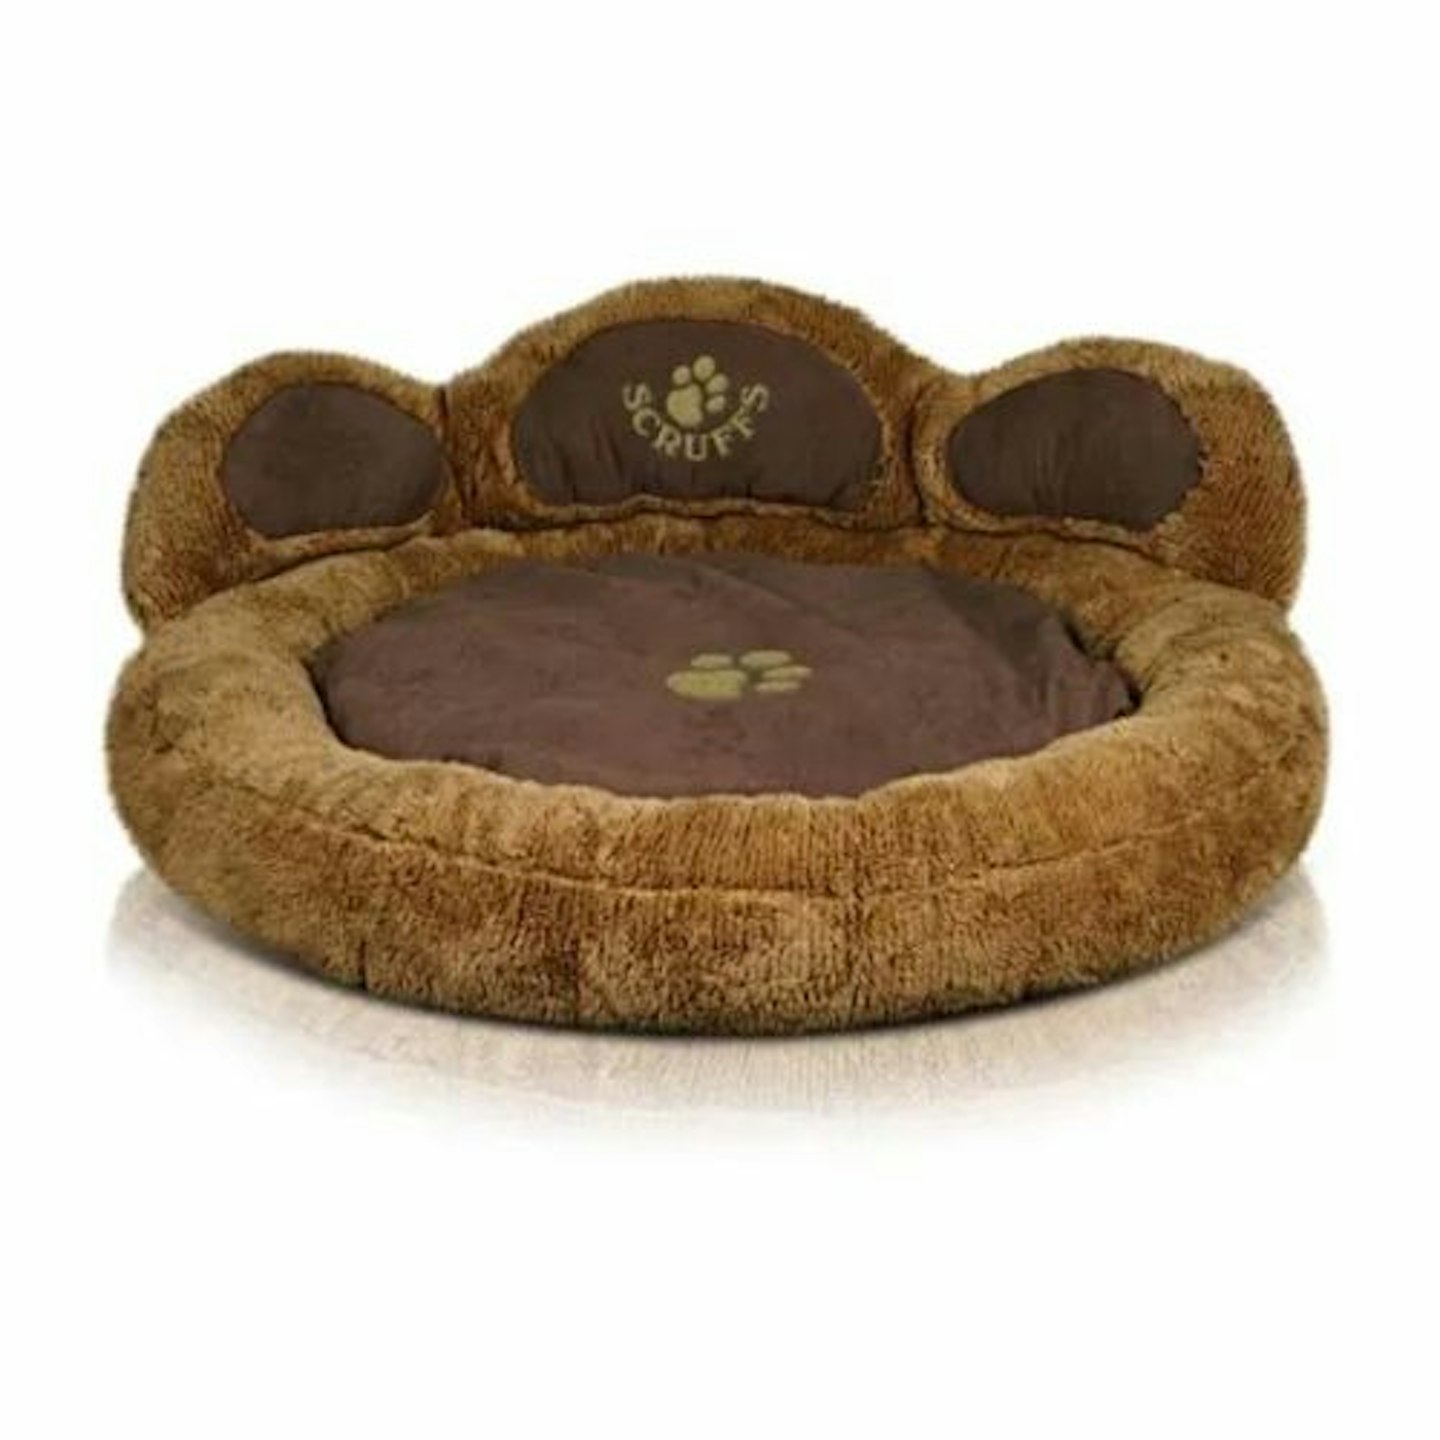 Scruffs Grizzly Bear Large Pet Bed - Brown